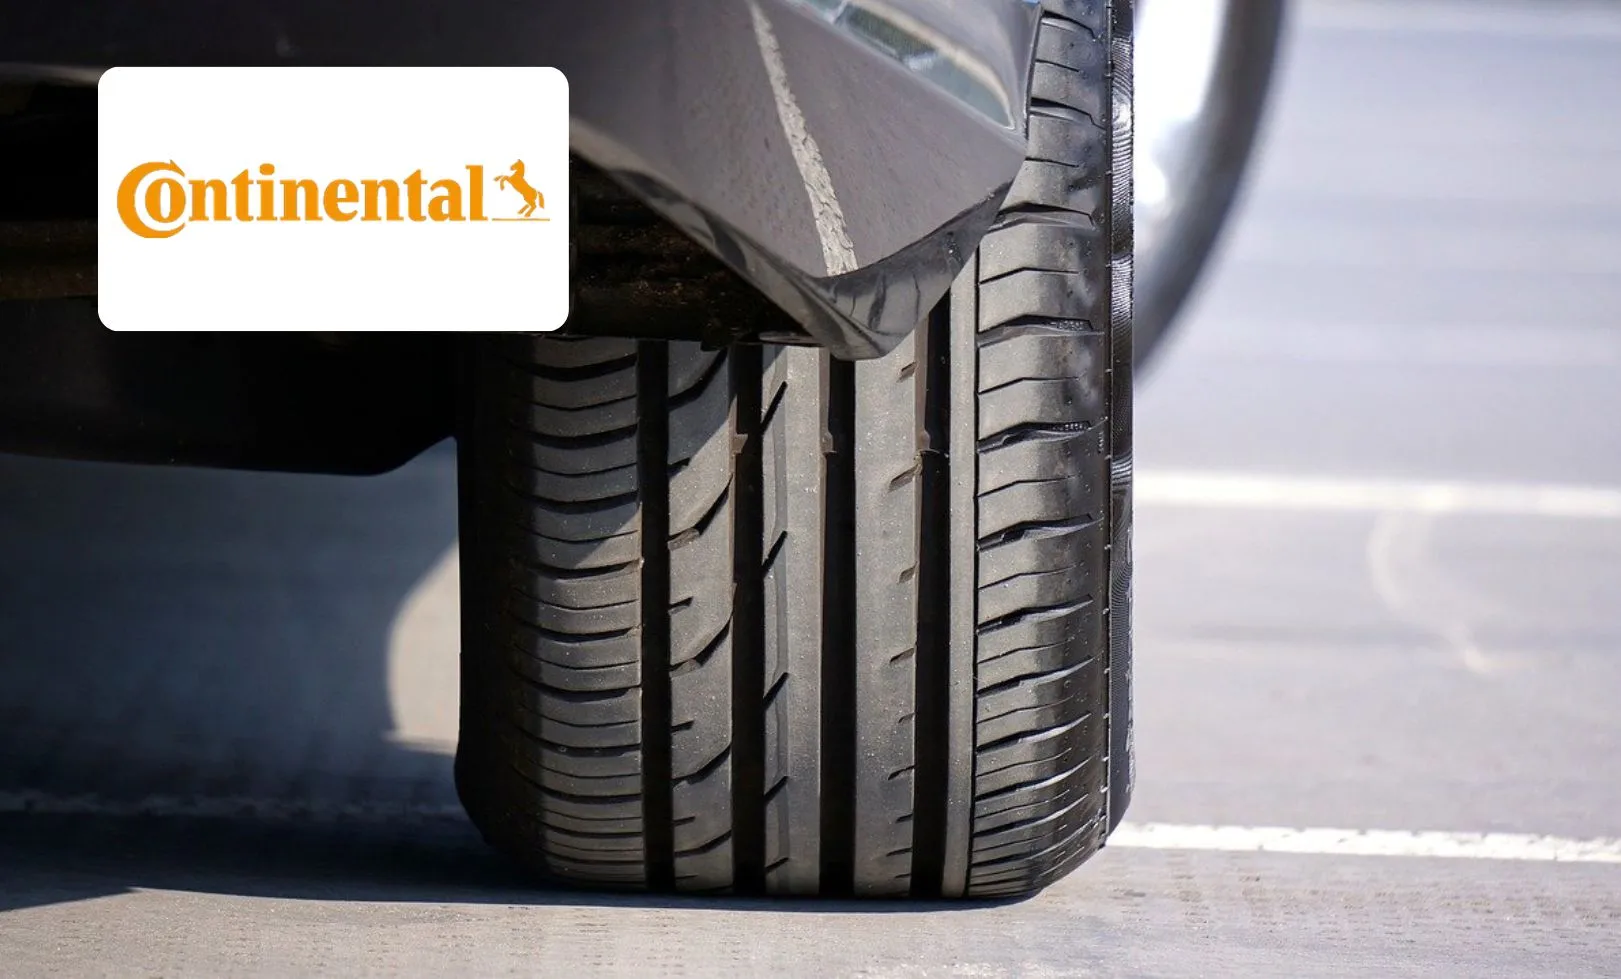 Continental Car Tyres Reviewed - Are They Actually Any Good